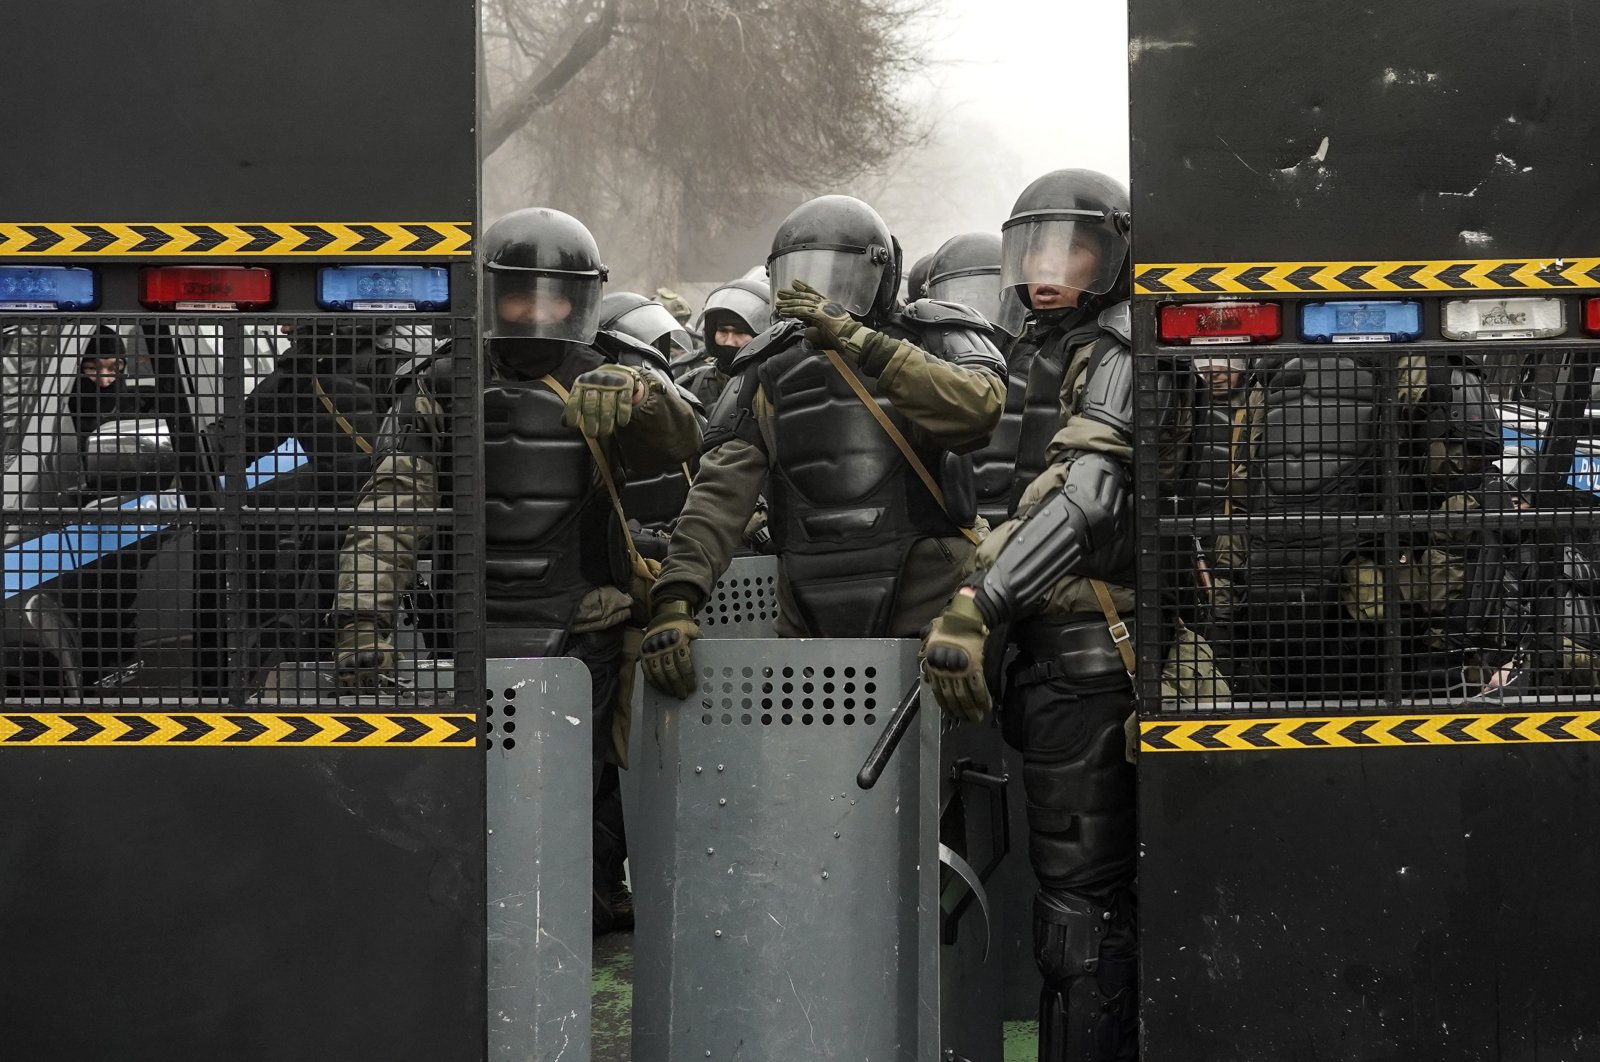 Riot police officers block a street during a protest rally over a hike in energy prices in Almaty, Kazakhstan, Jan. 5, 2022. (EPA Photo)